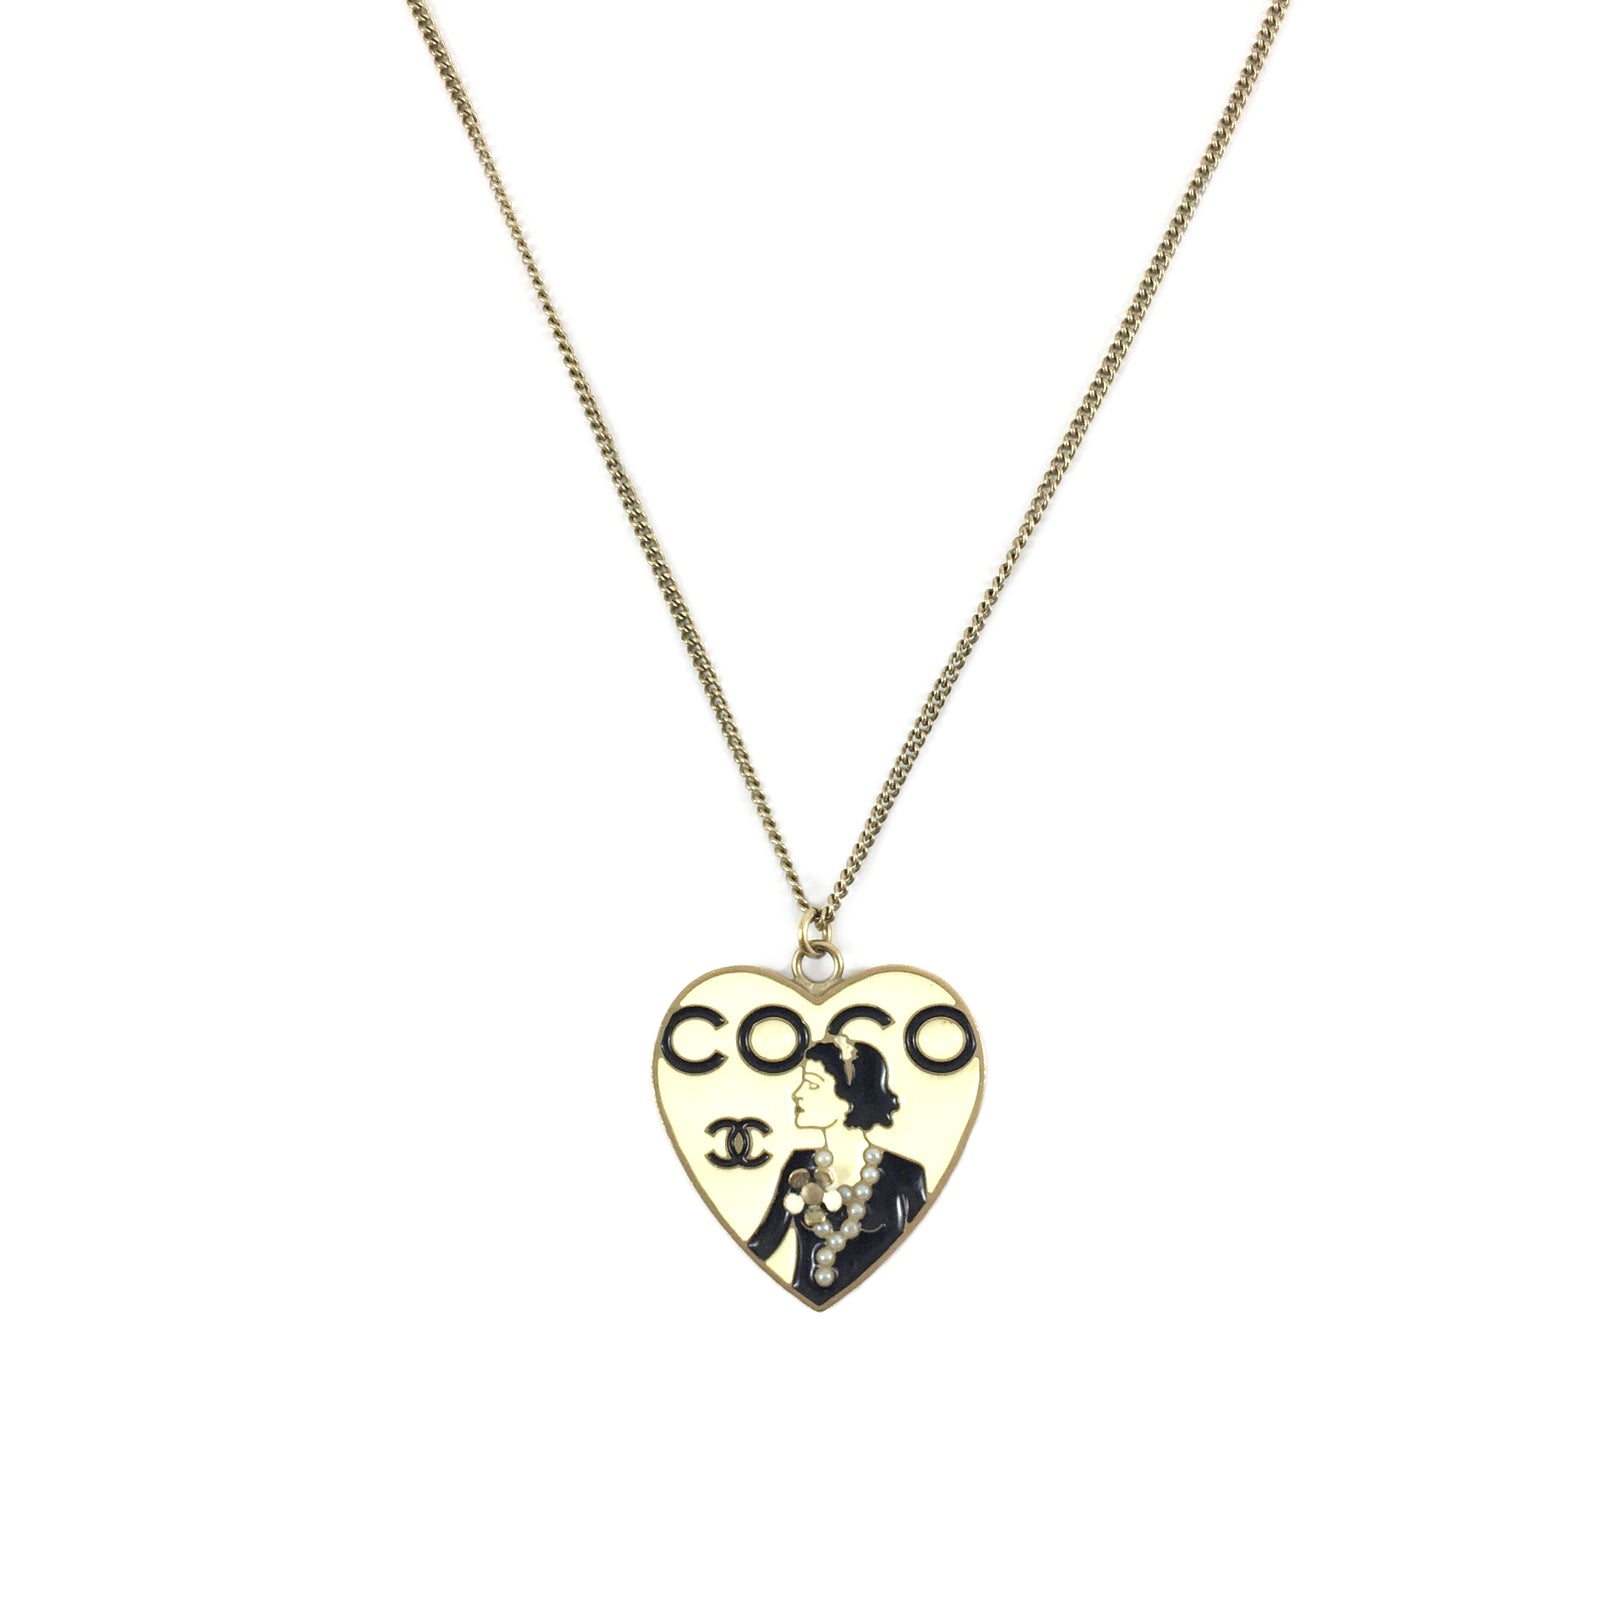 Authentic CHANEL Coco Chanel Necklace White Gold